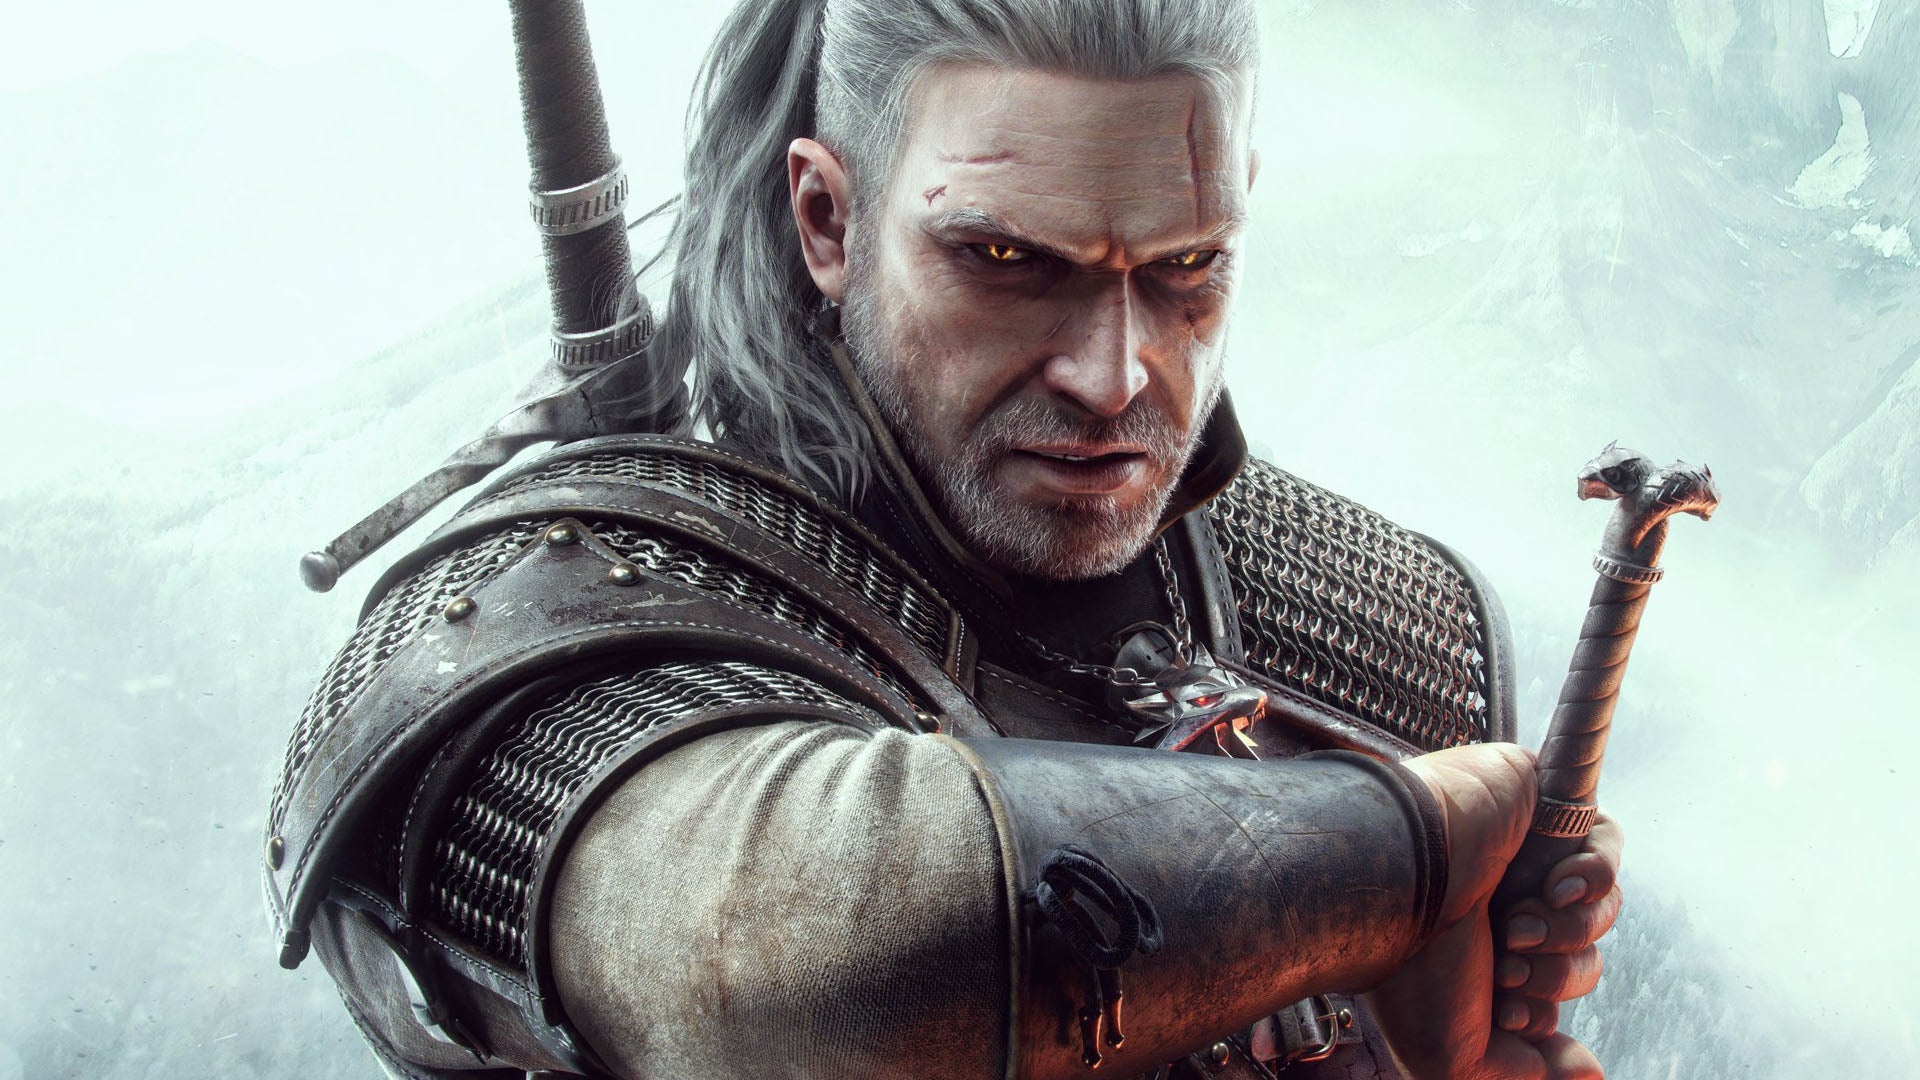 The Witcher 3 S Latest Patch Promises Improved Performance Mode On Consoles Gaming News By